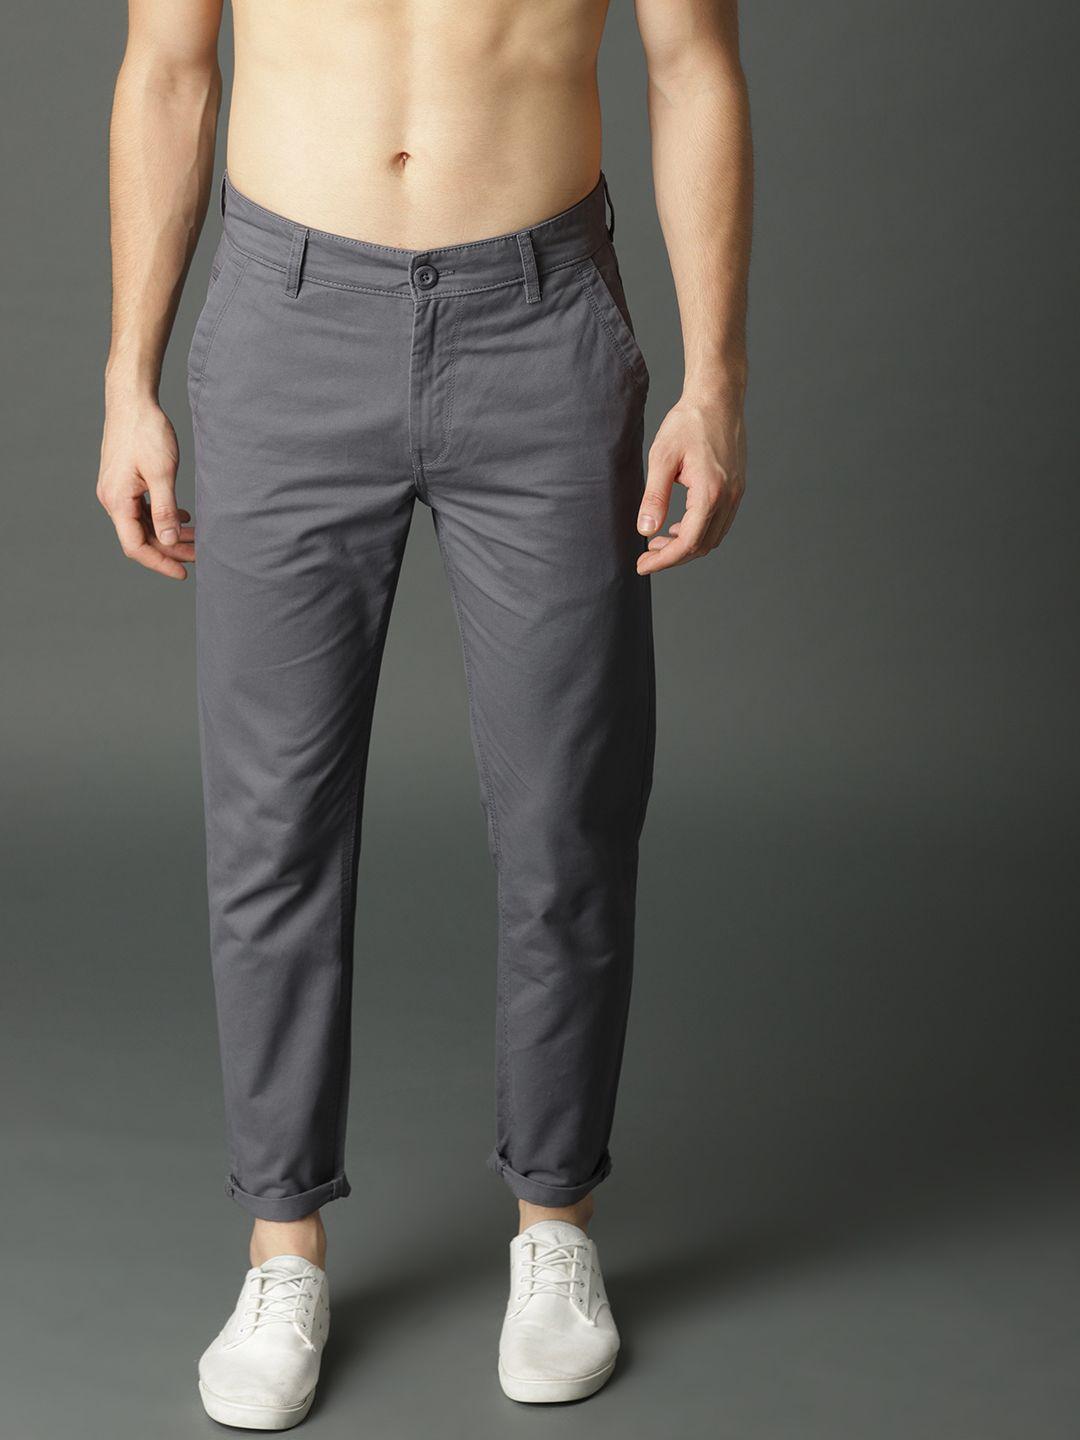 roadster-men-charcoal-grey-regular-fit-solid-sustainable-chinos